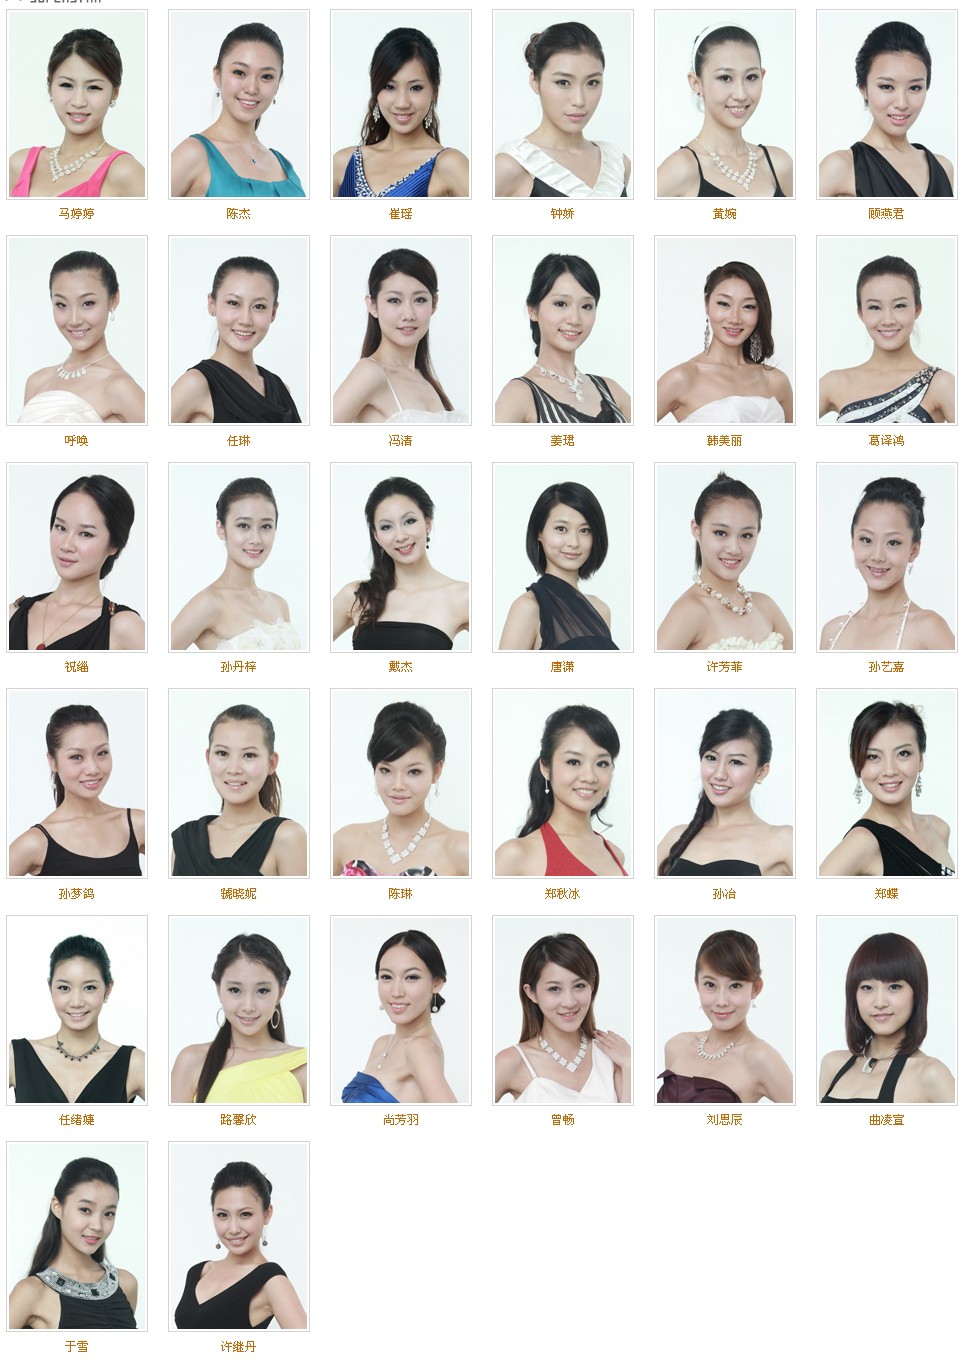 Miss China World 2010 - Meet the contestants 55594610